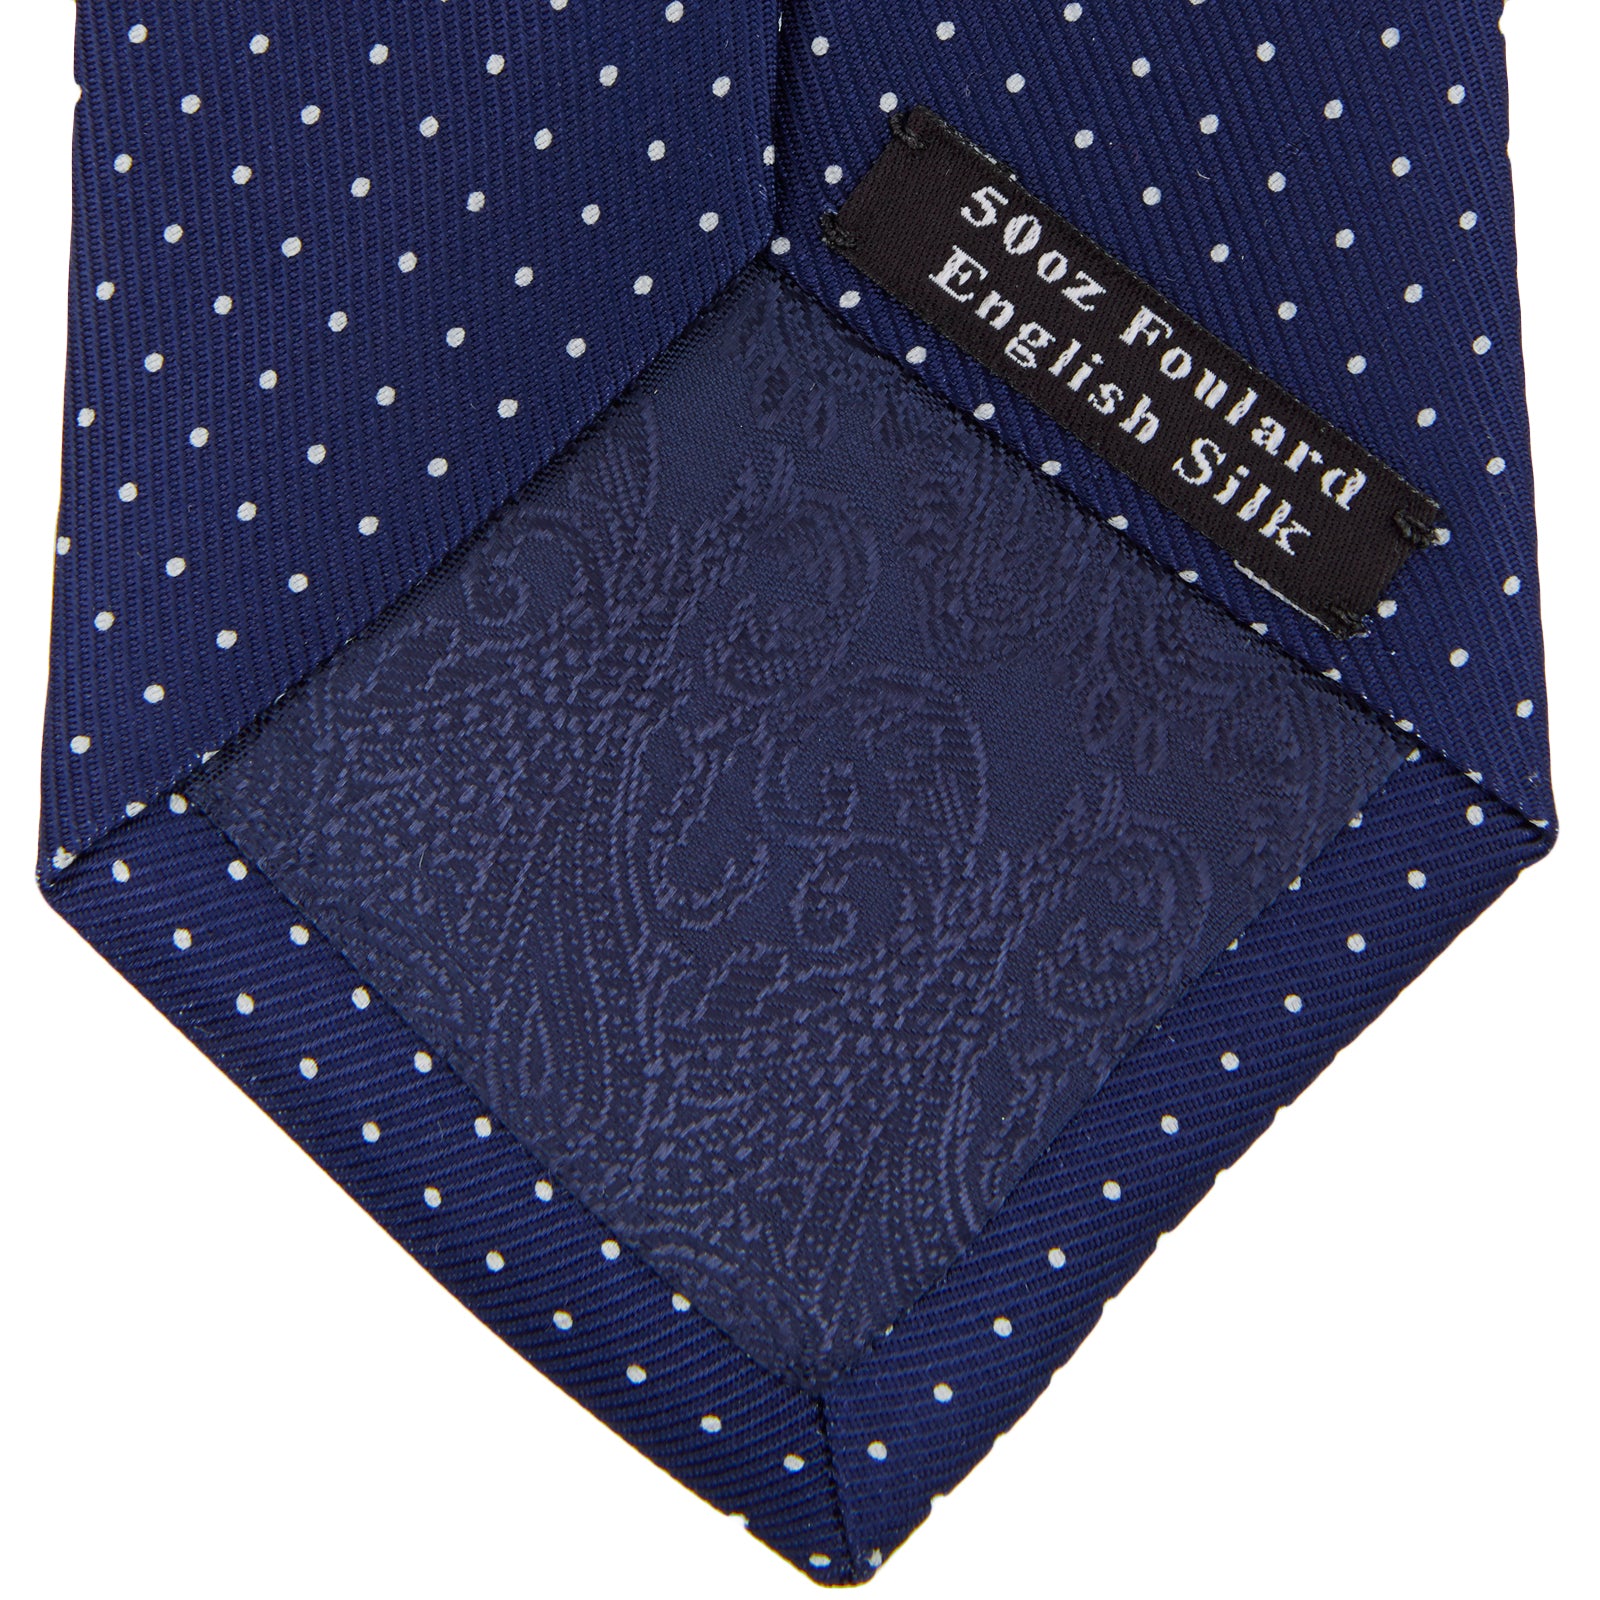 Blue and White Small Spot Printed Silk Tie